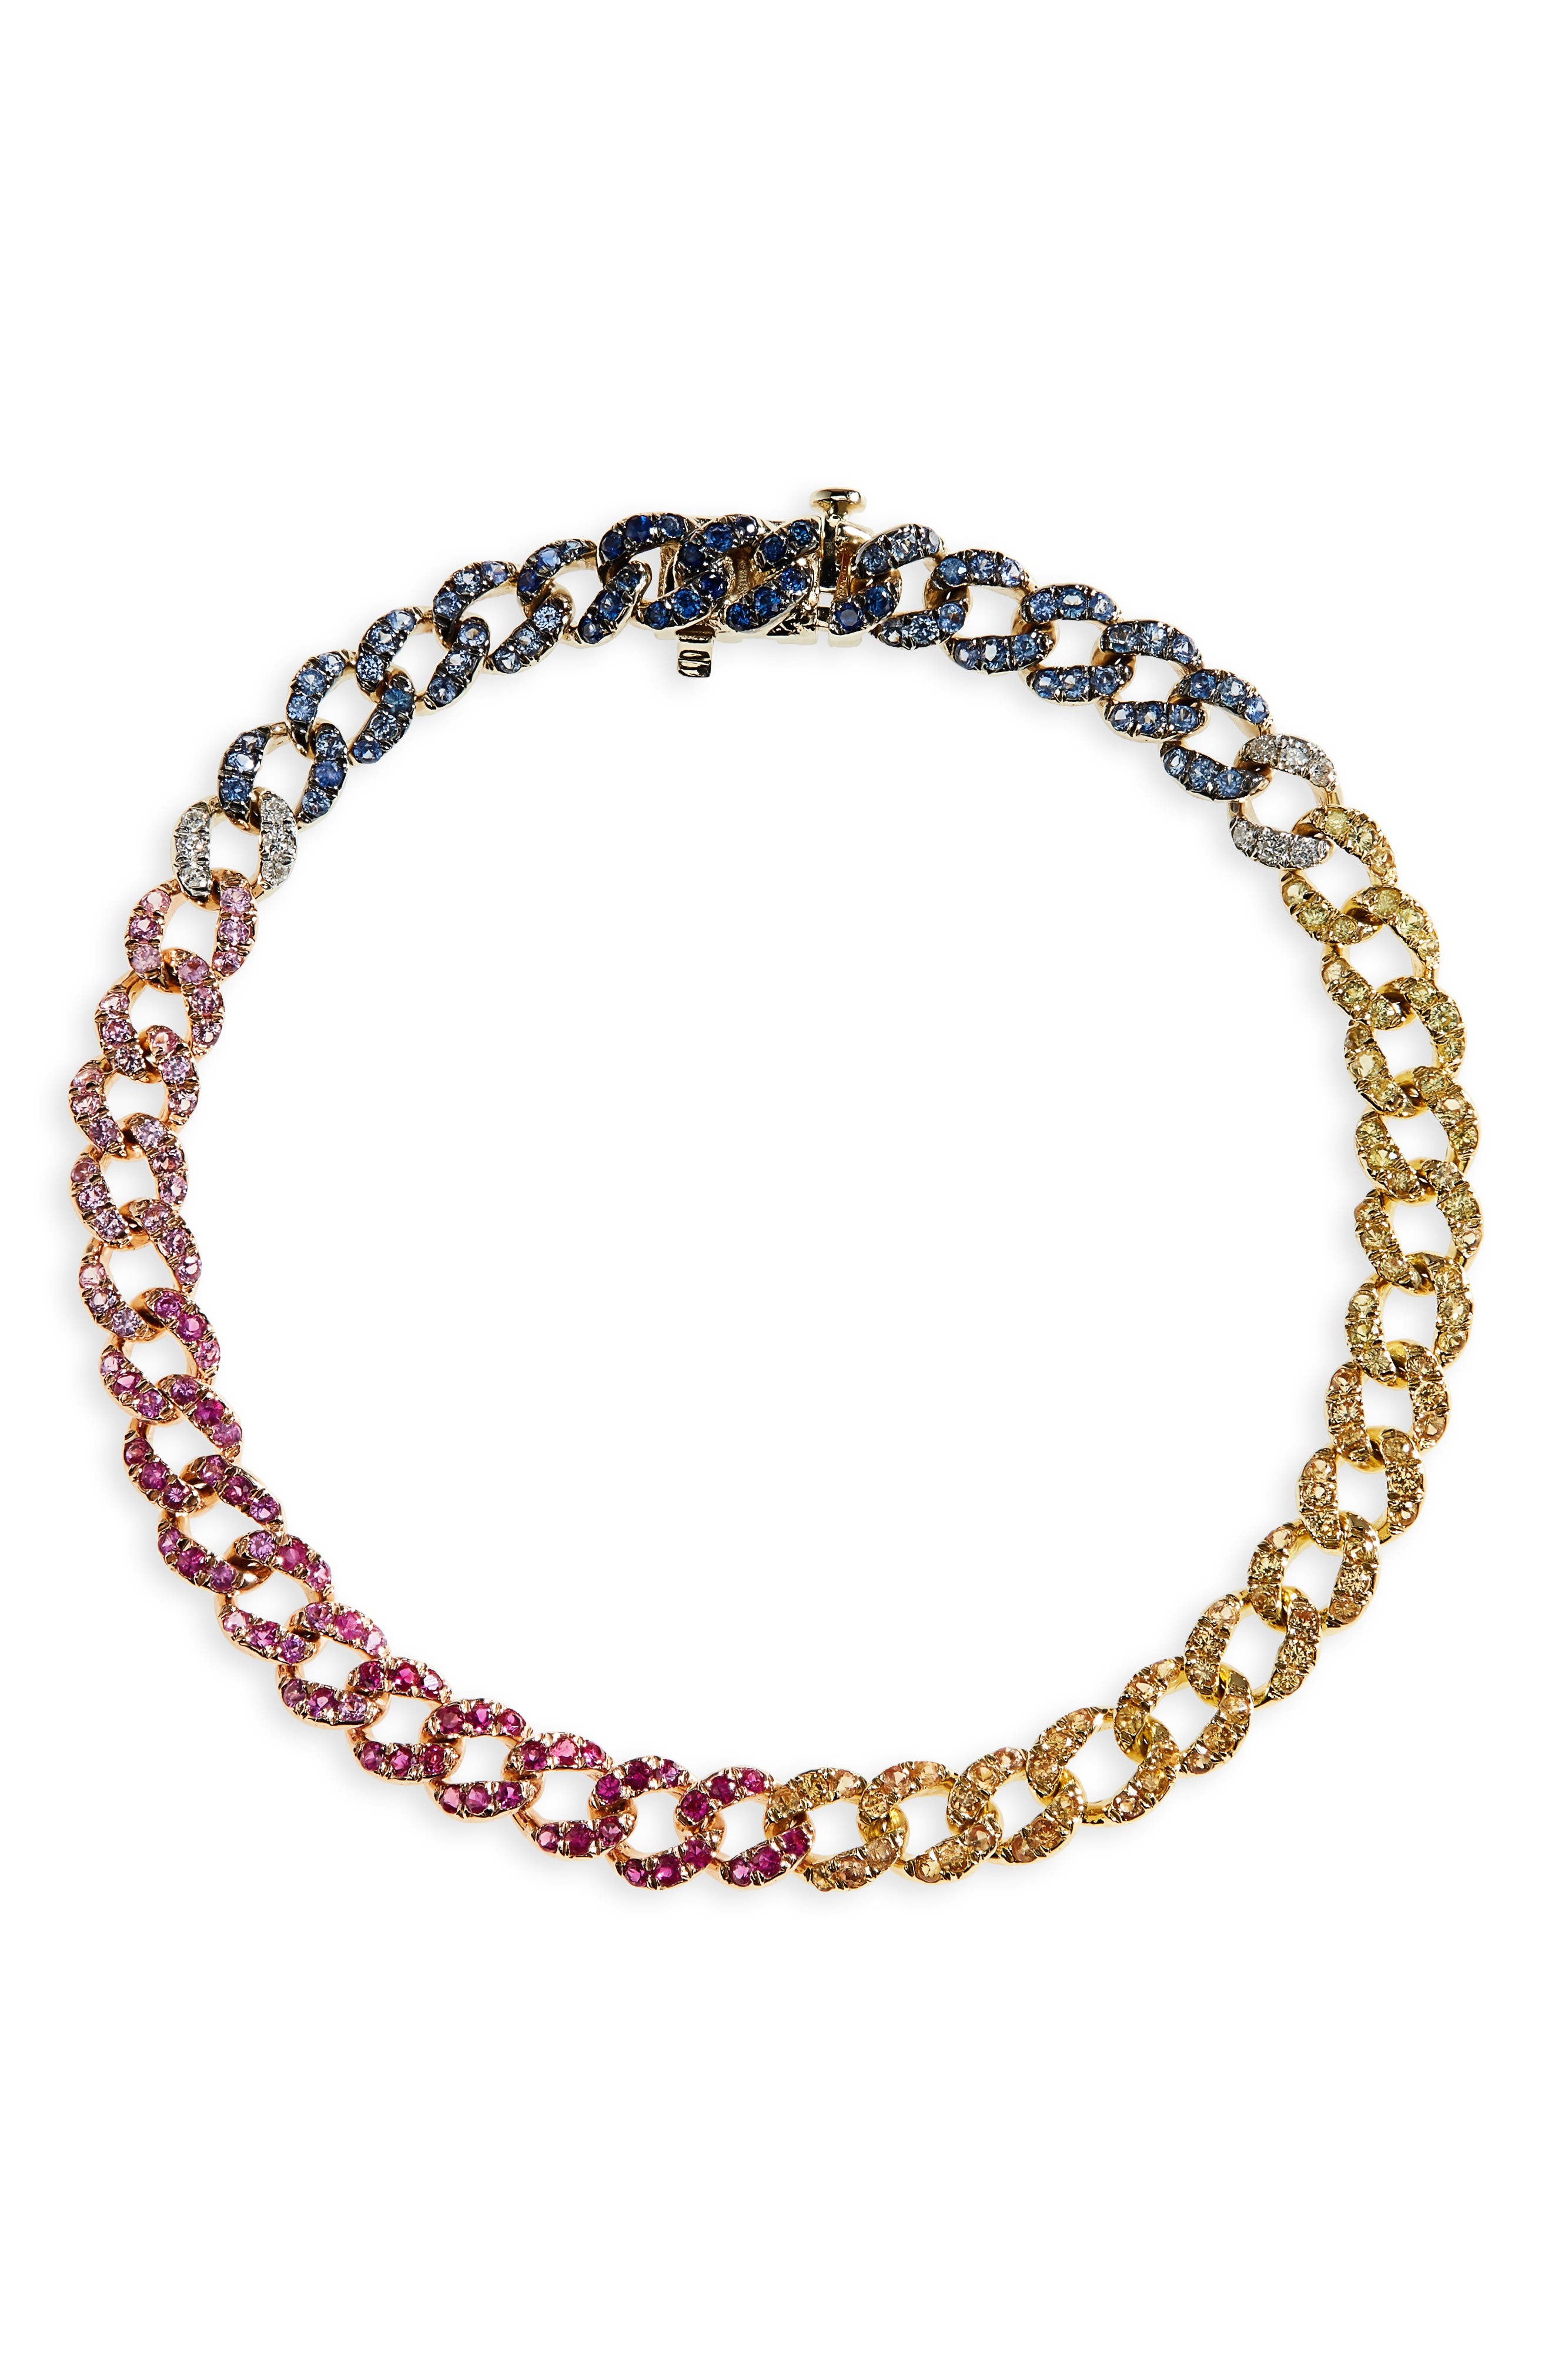 SHAY Mini Rainbow Pave Gemstone Link Bracelet in Yellow Gold at Nordstrom